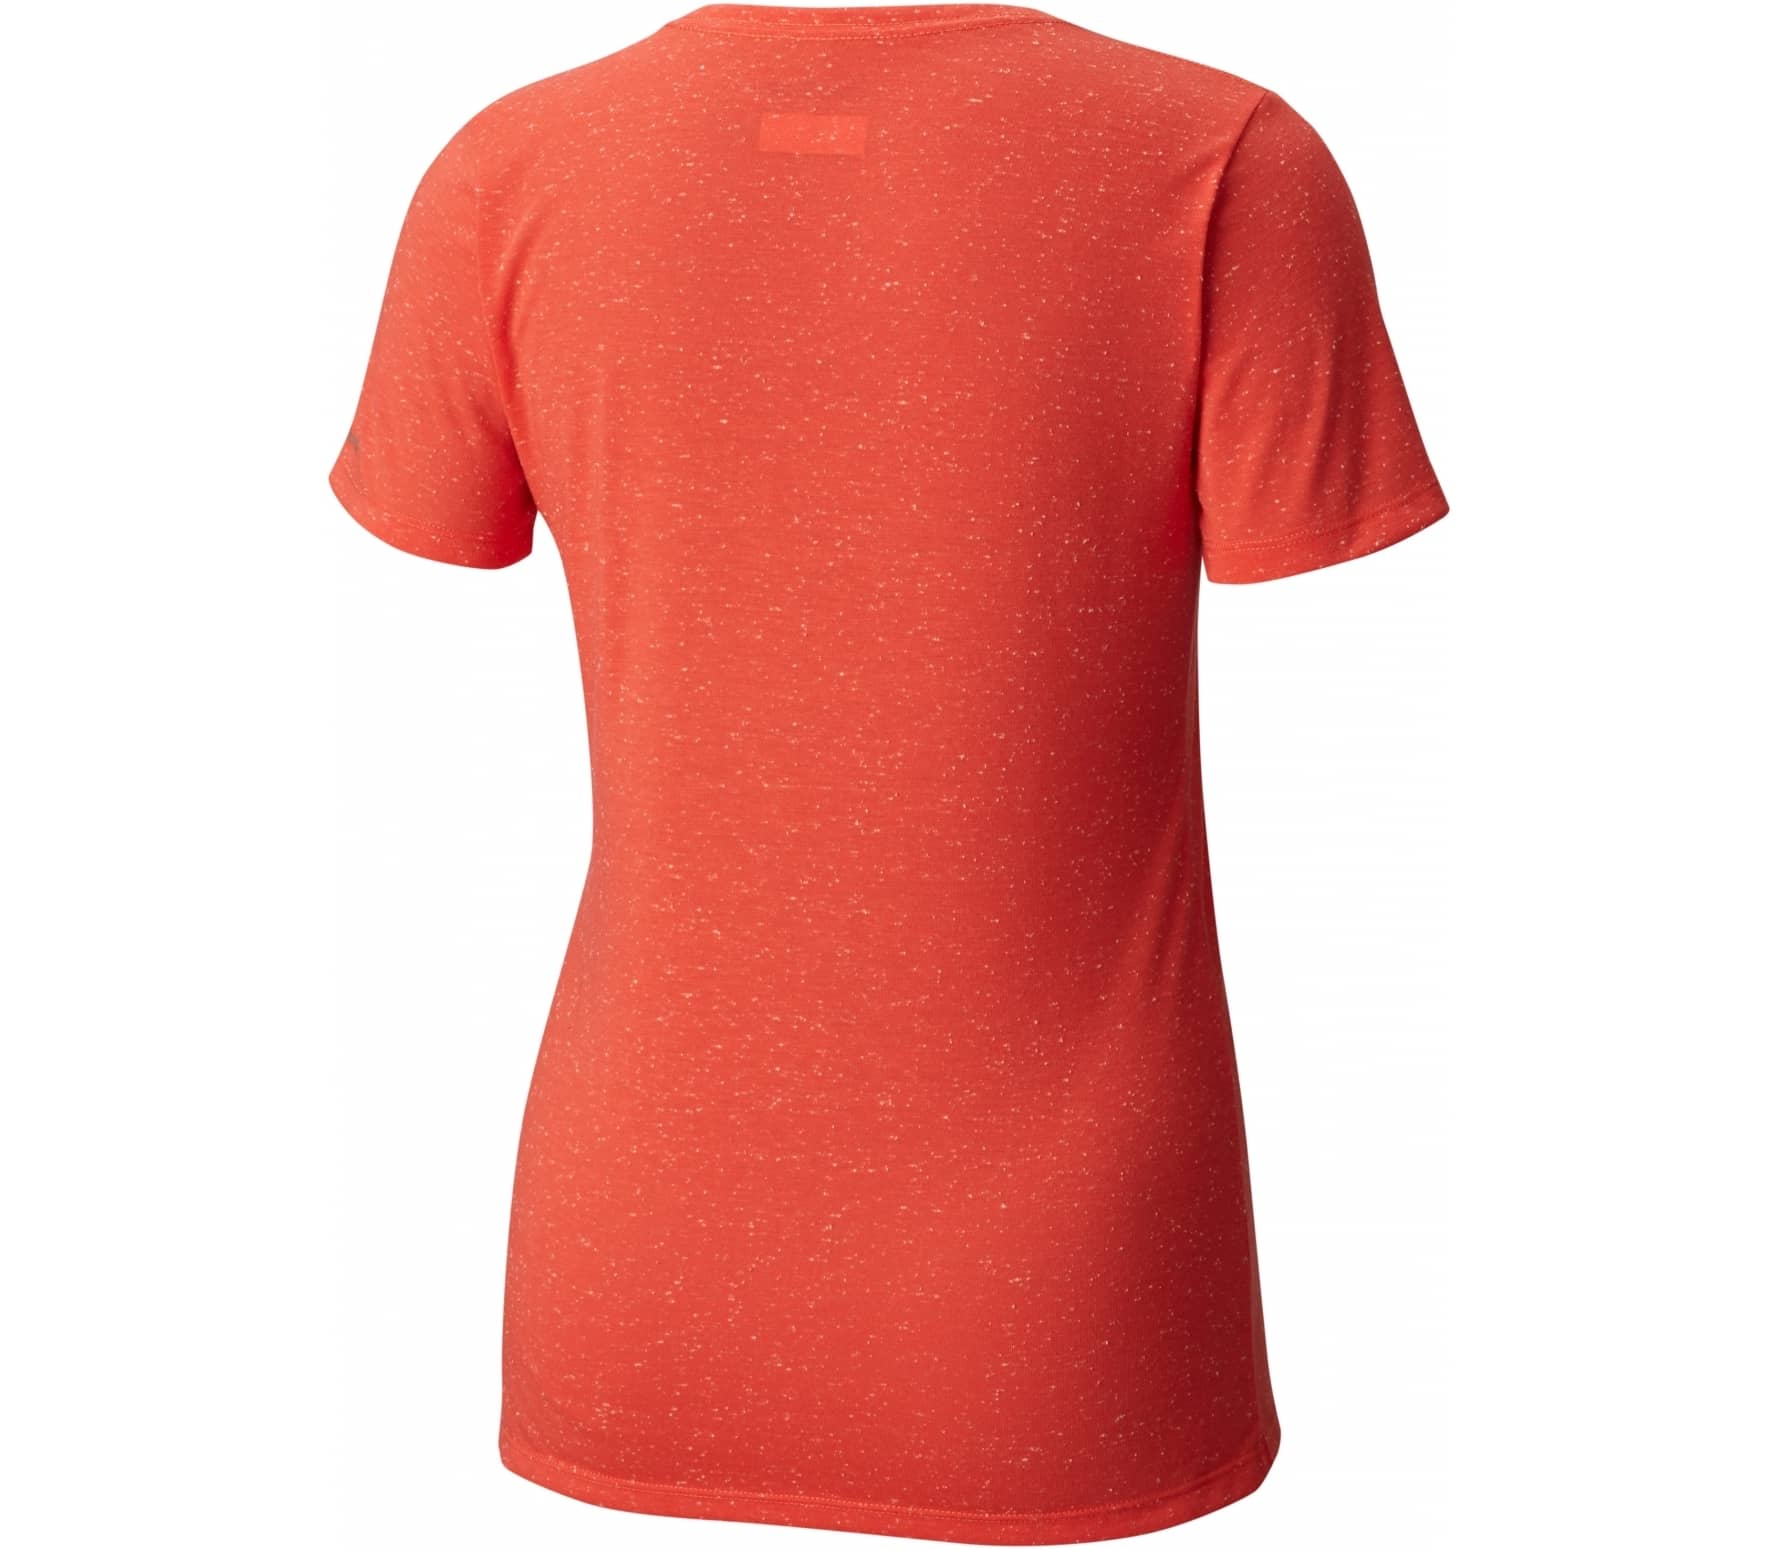 Top Red Logo - Columbia Elements women's logo top (red) it